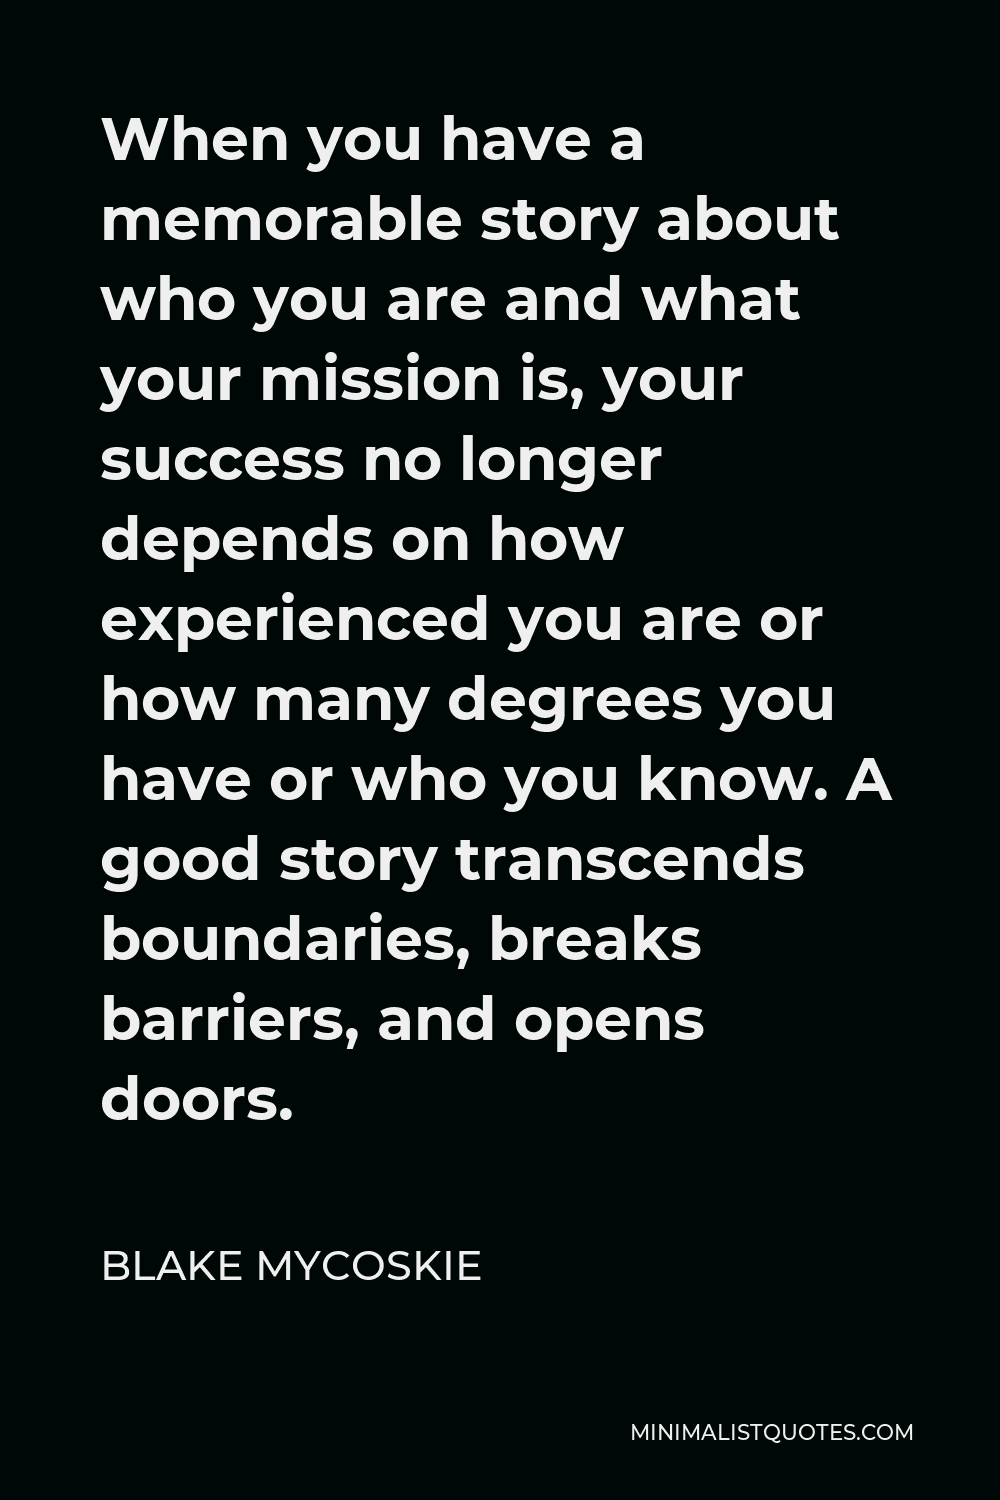 Blake Mycoskie Quote - When you have a memorable story about who you are and what your mission is, your success no longer depends on how experienced you are or how many degrees you have or who you know. A good story transcends boundaries, breaks barriers, and opens doors.